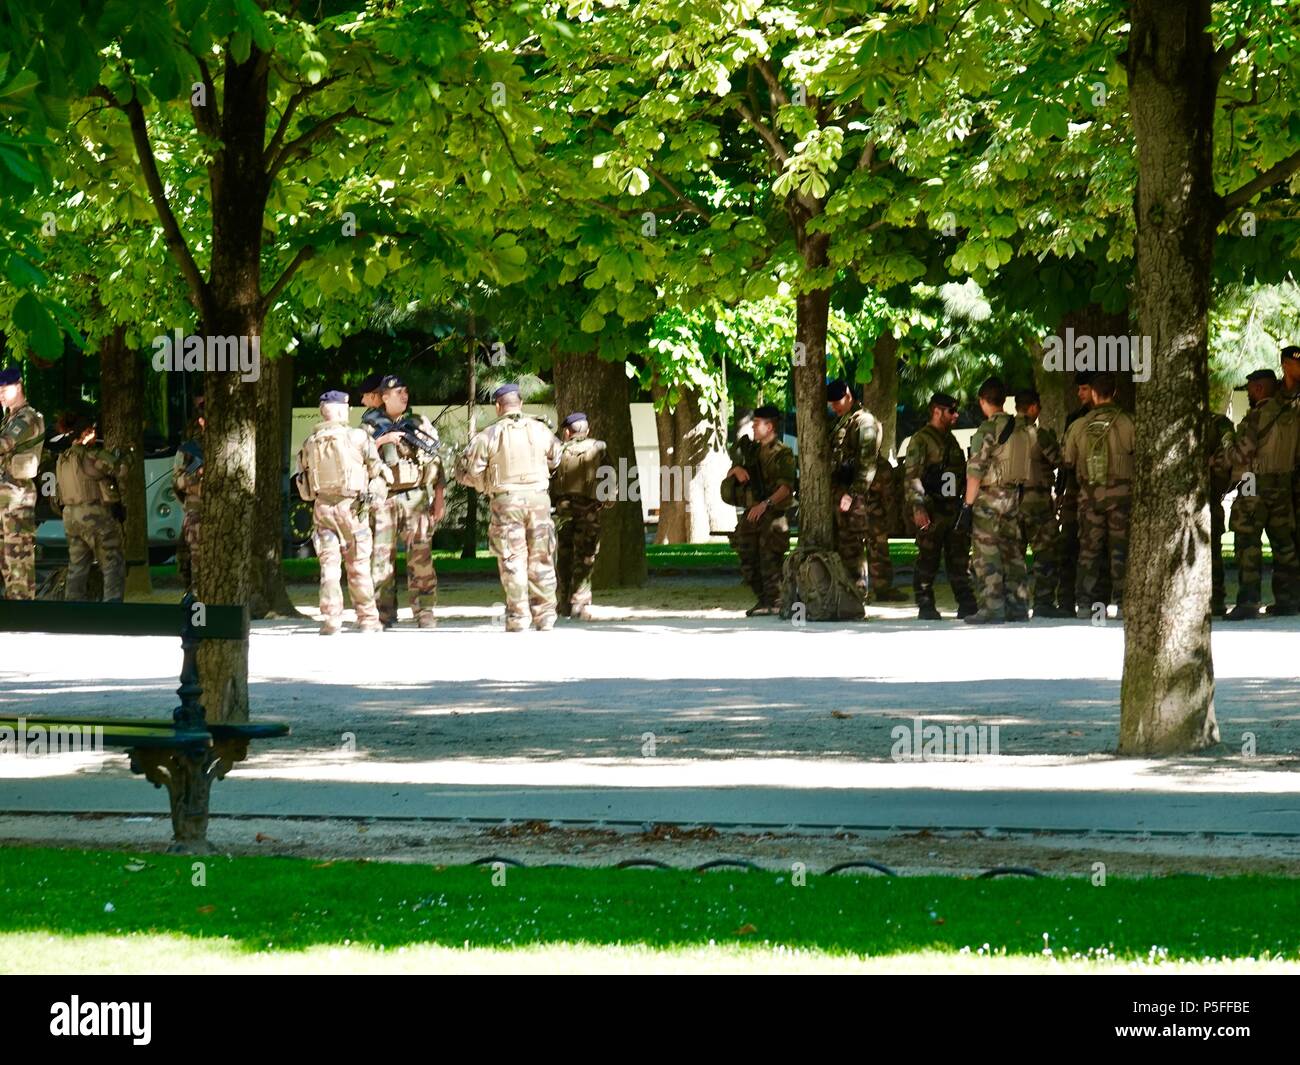 Members of a French military squadron preparing to begin patrol in the Luxembourg Gardens, Paris, France. Stock Photo